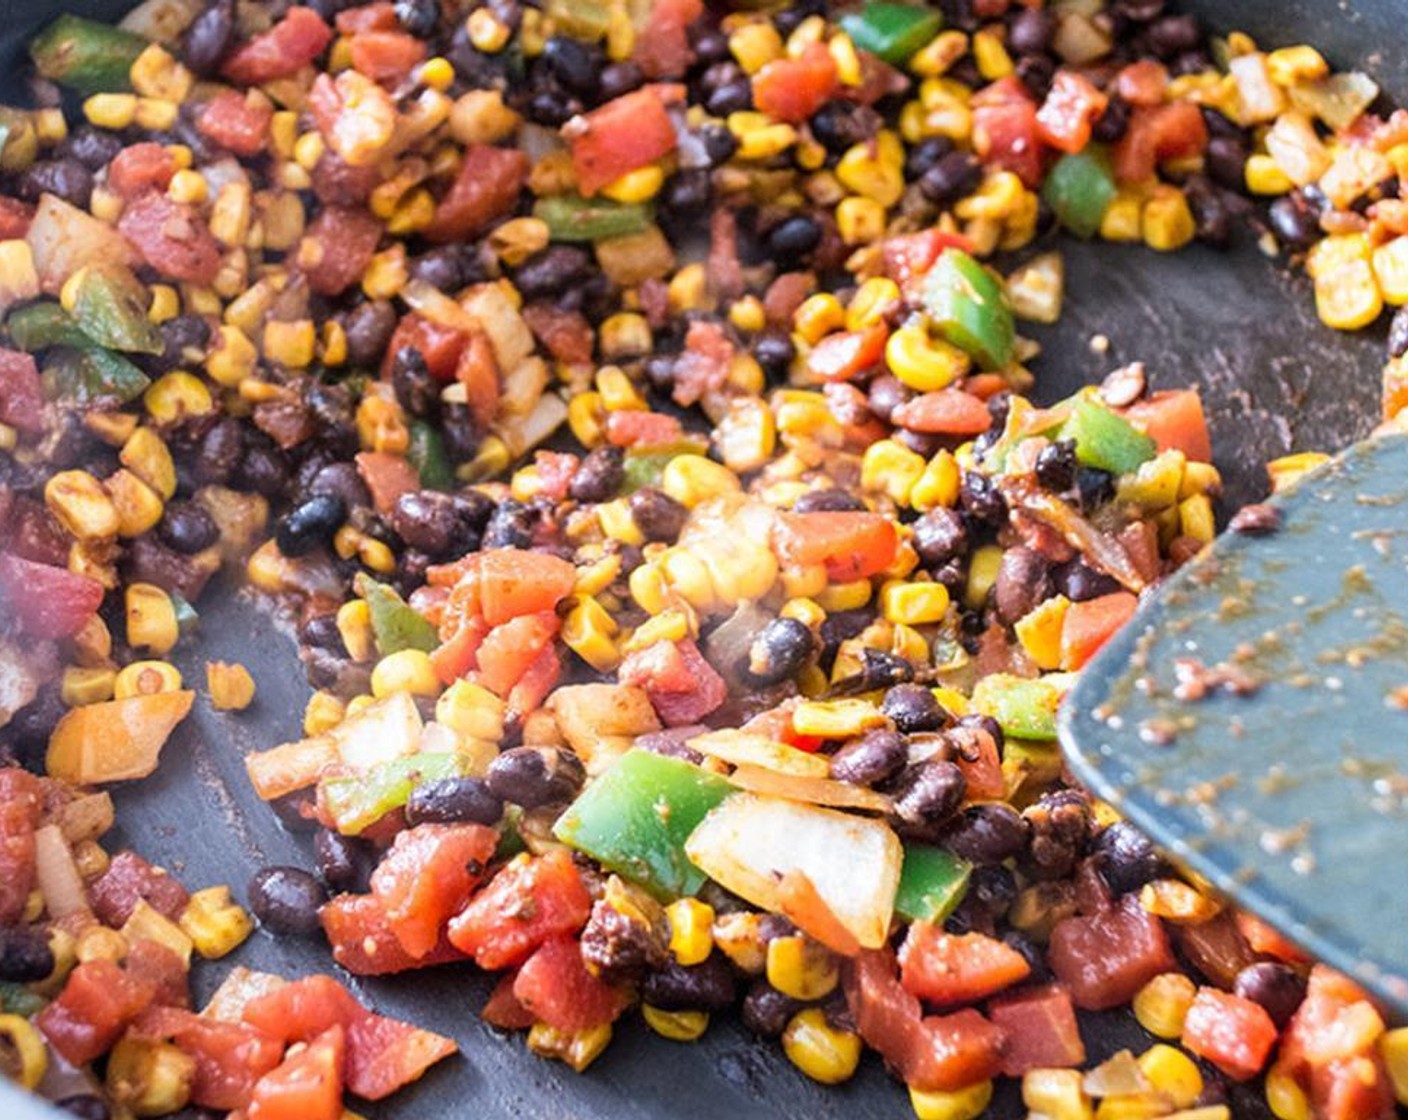 step 6 Stir in seasoned corn, Canned Black Beans (1 cup), and Canned Diced Tomatoes with Green Chilies (1 cup) and cook for 5-7 minutes or until beans and tomatoes are heated through and all seasonings and flavors are well combined.